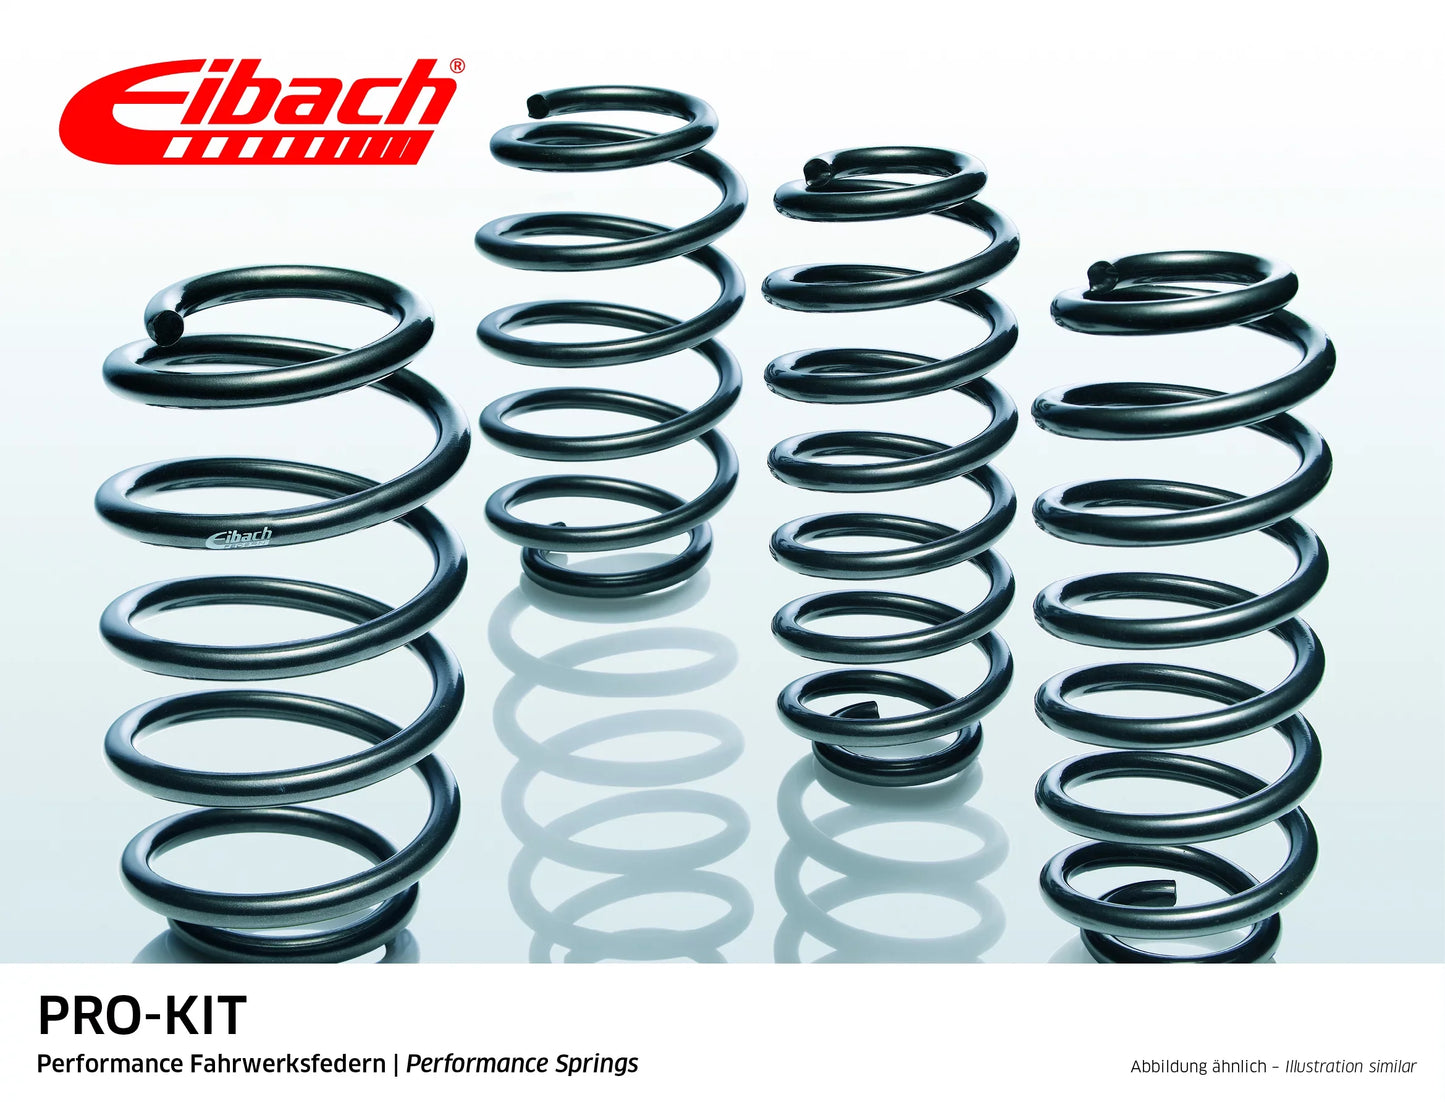 Eibach Pro-Kit Lowering Springs (E10-35-008-01-22) at £330.74